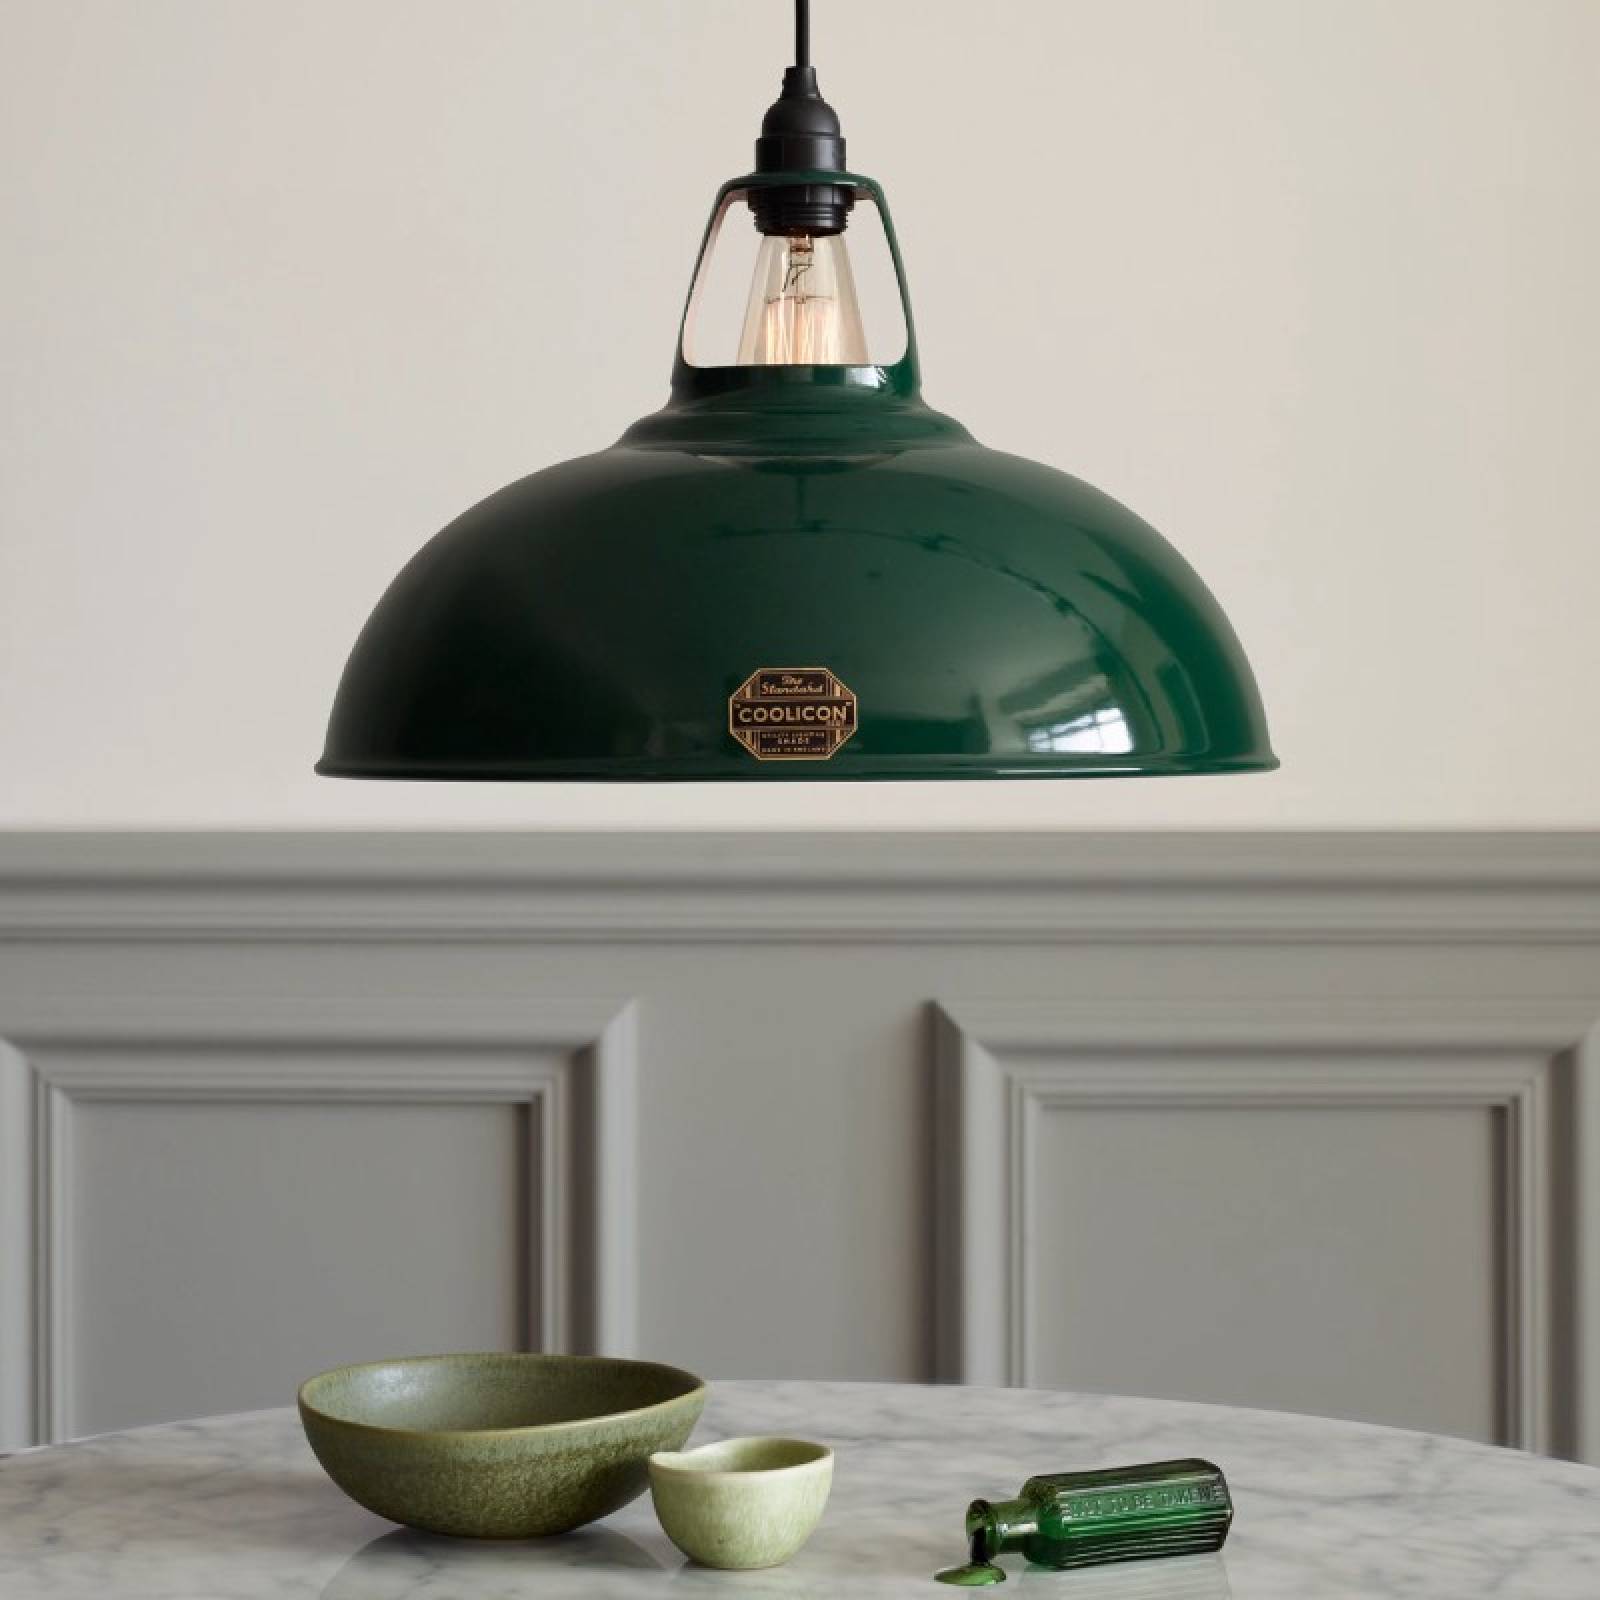 Classic Large Enamel Shade In Original Green By Coolicon thumbnails